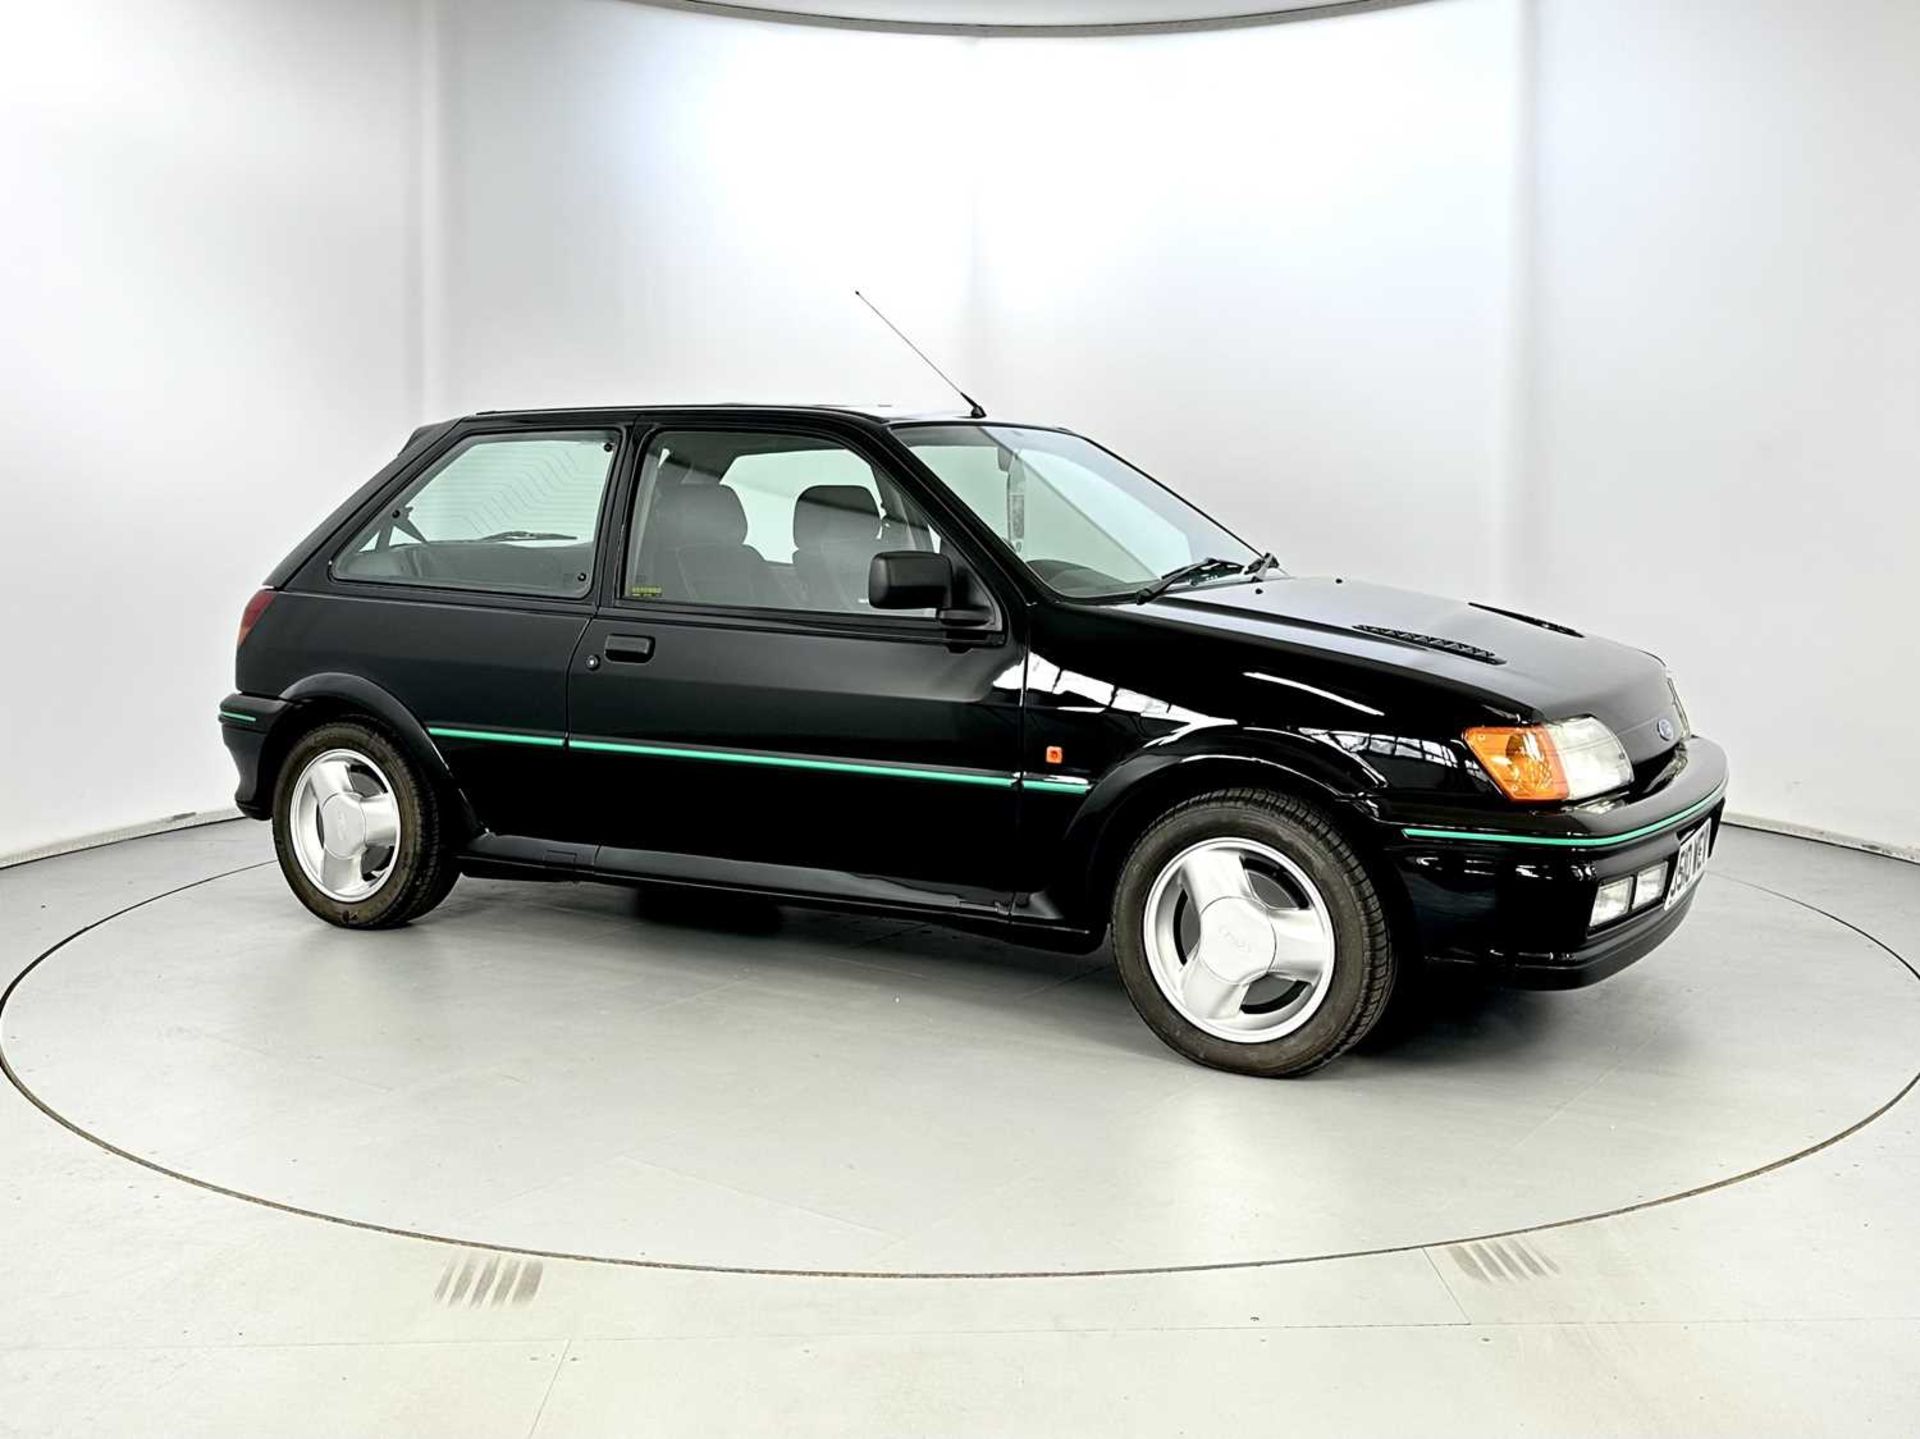 1991 Ford Fiesta RS Turbo Spectacular Original Condition  - Image 12 of 40